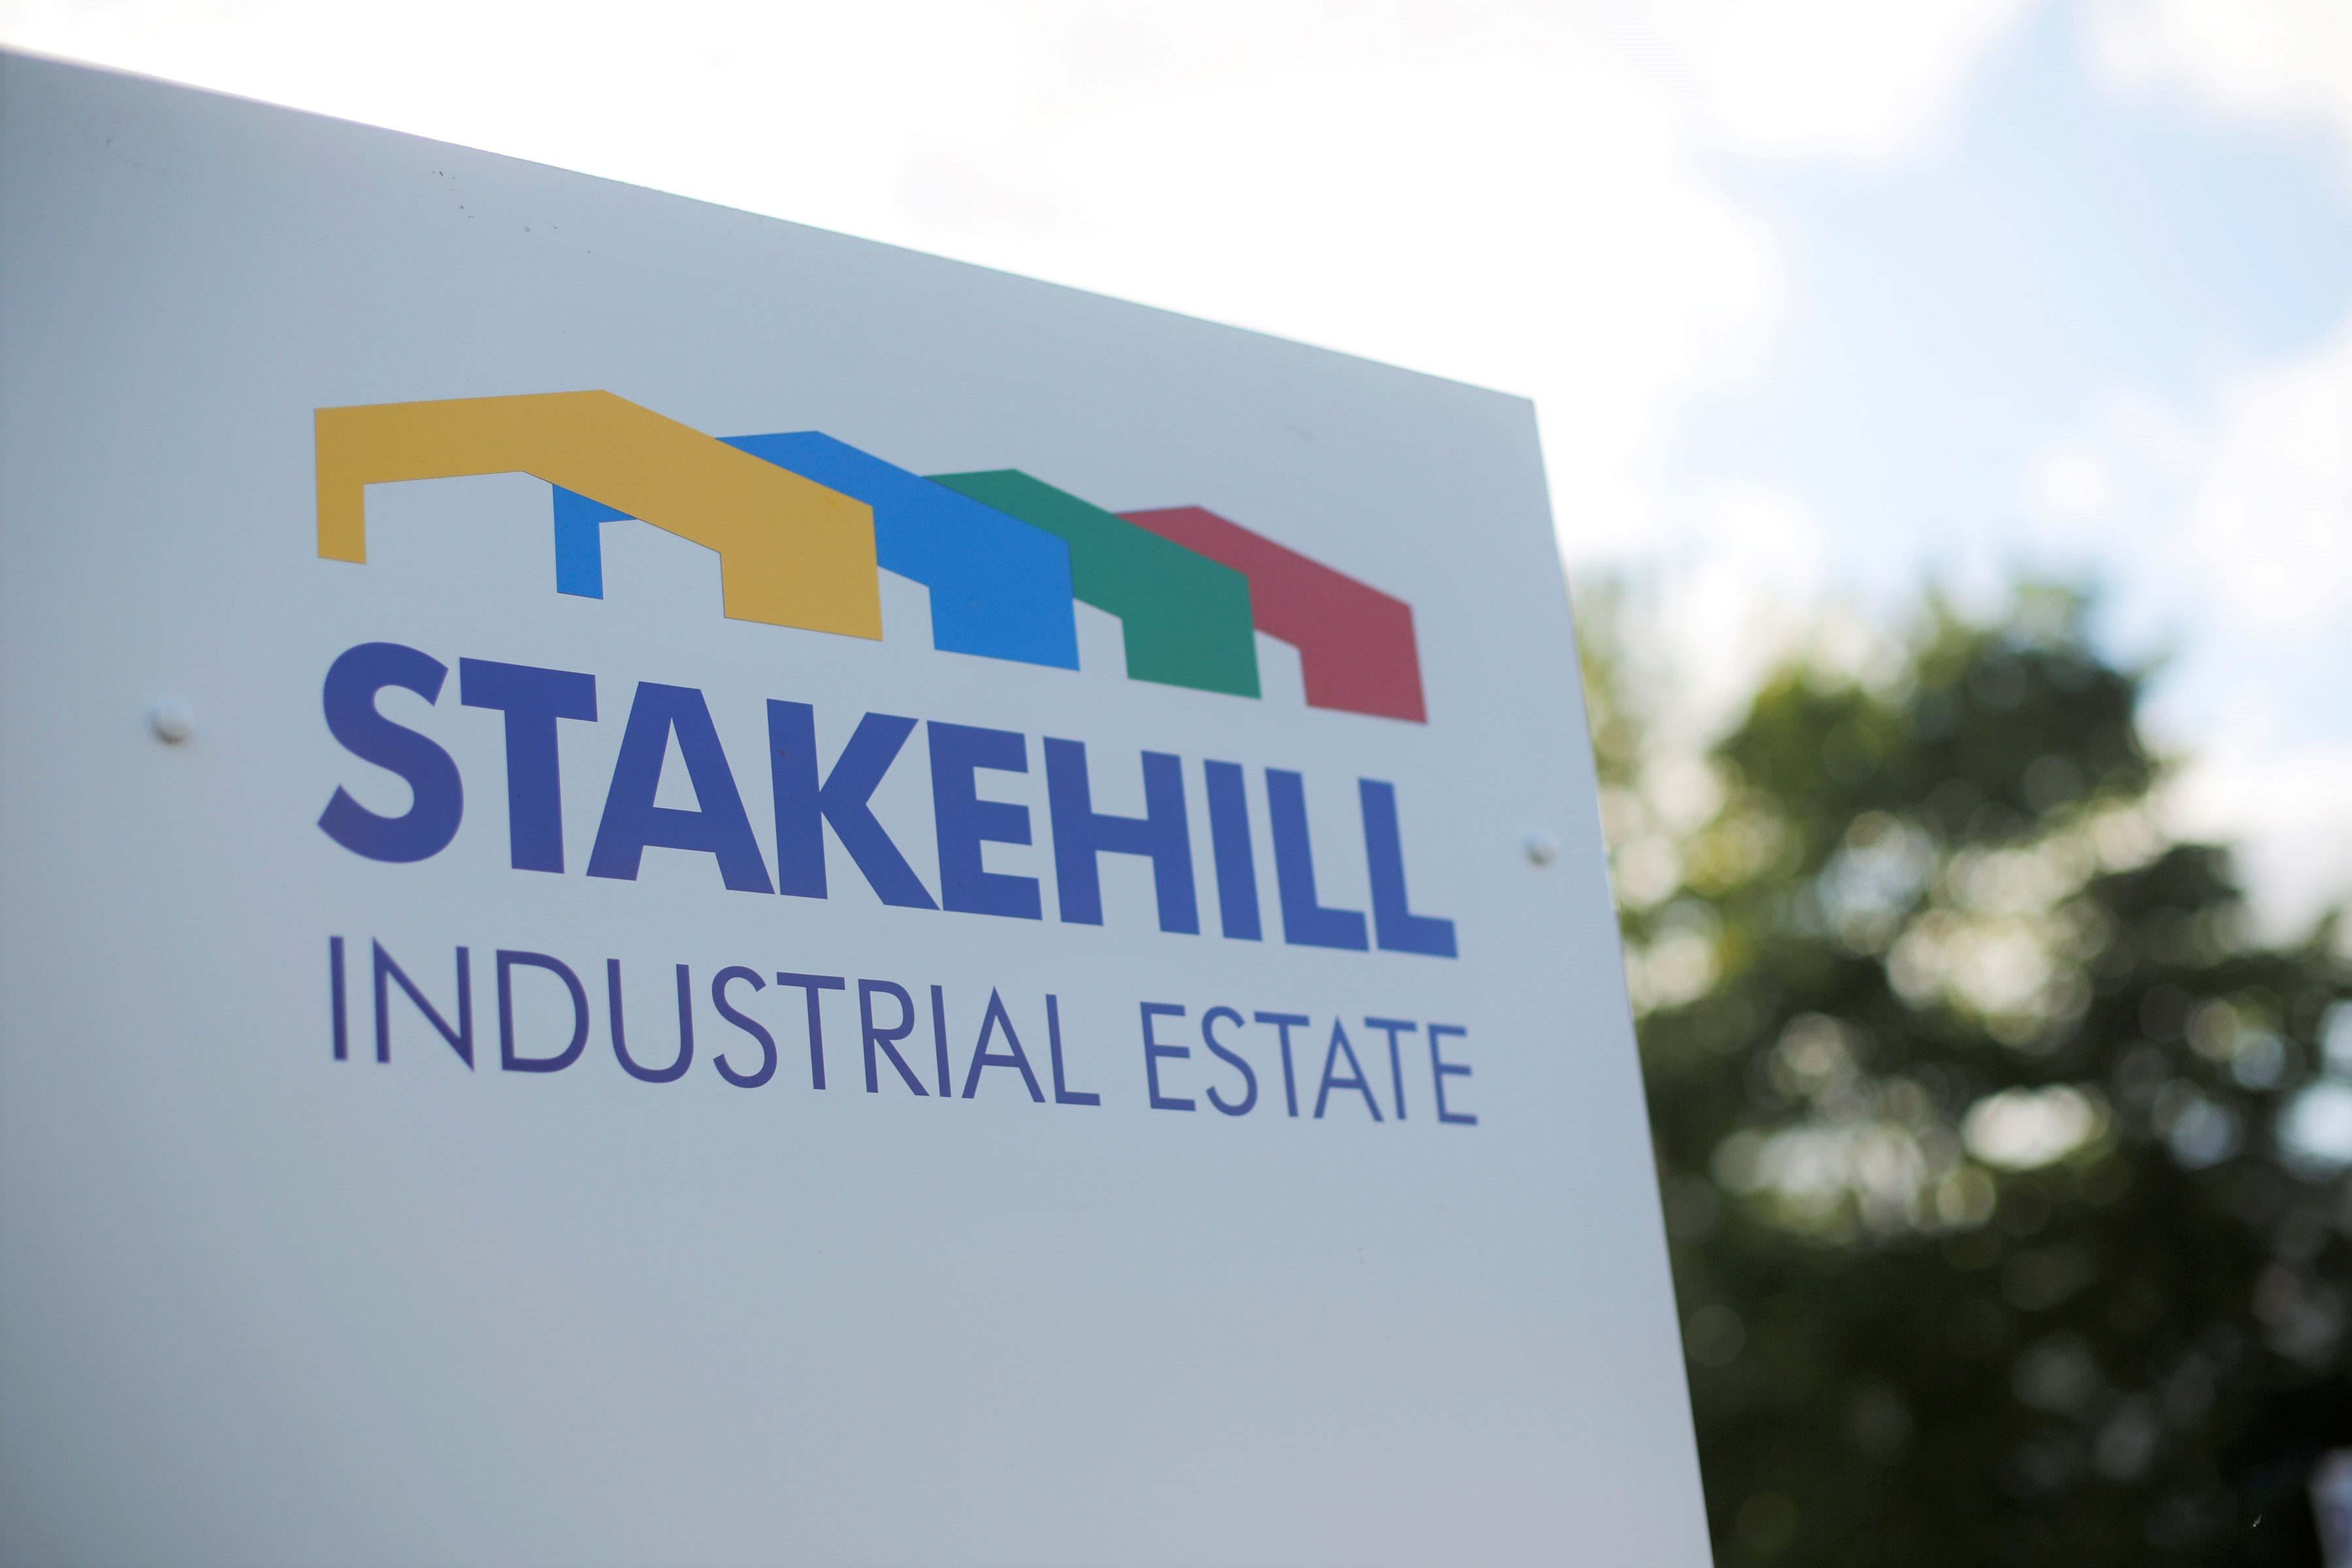 Image: Making a better tomorrow – Plans launched for the decarbonisation of Stakehill Industrial Estate